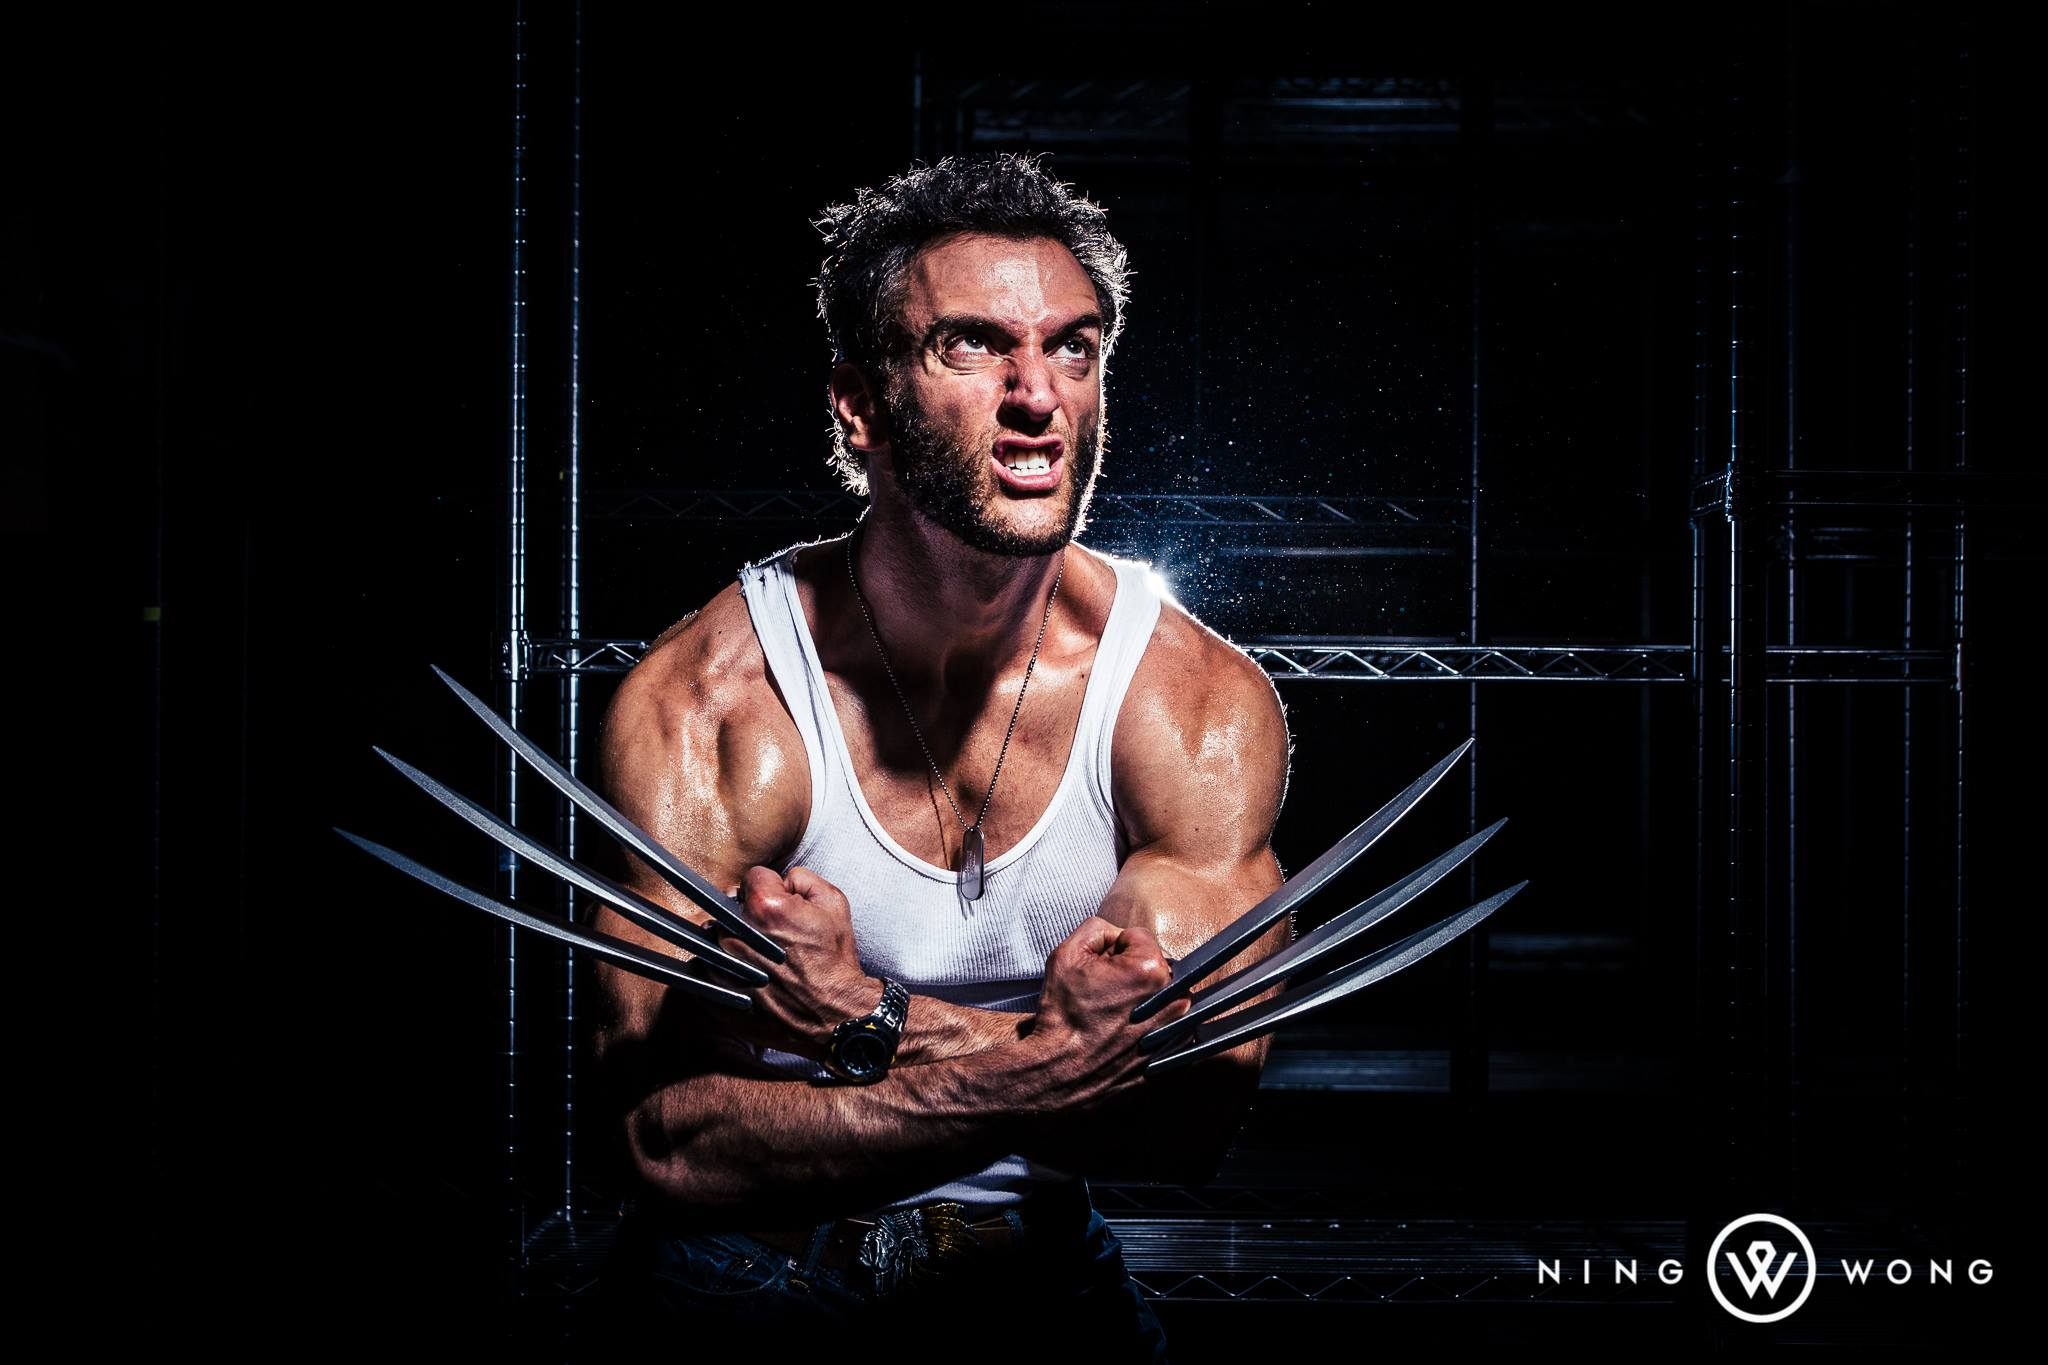   Lonstermash  is Wolverine — Photo by  Ning Wong  